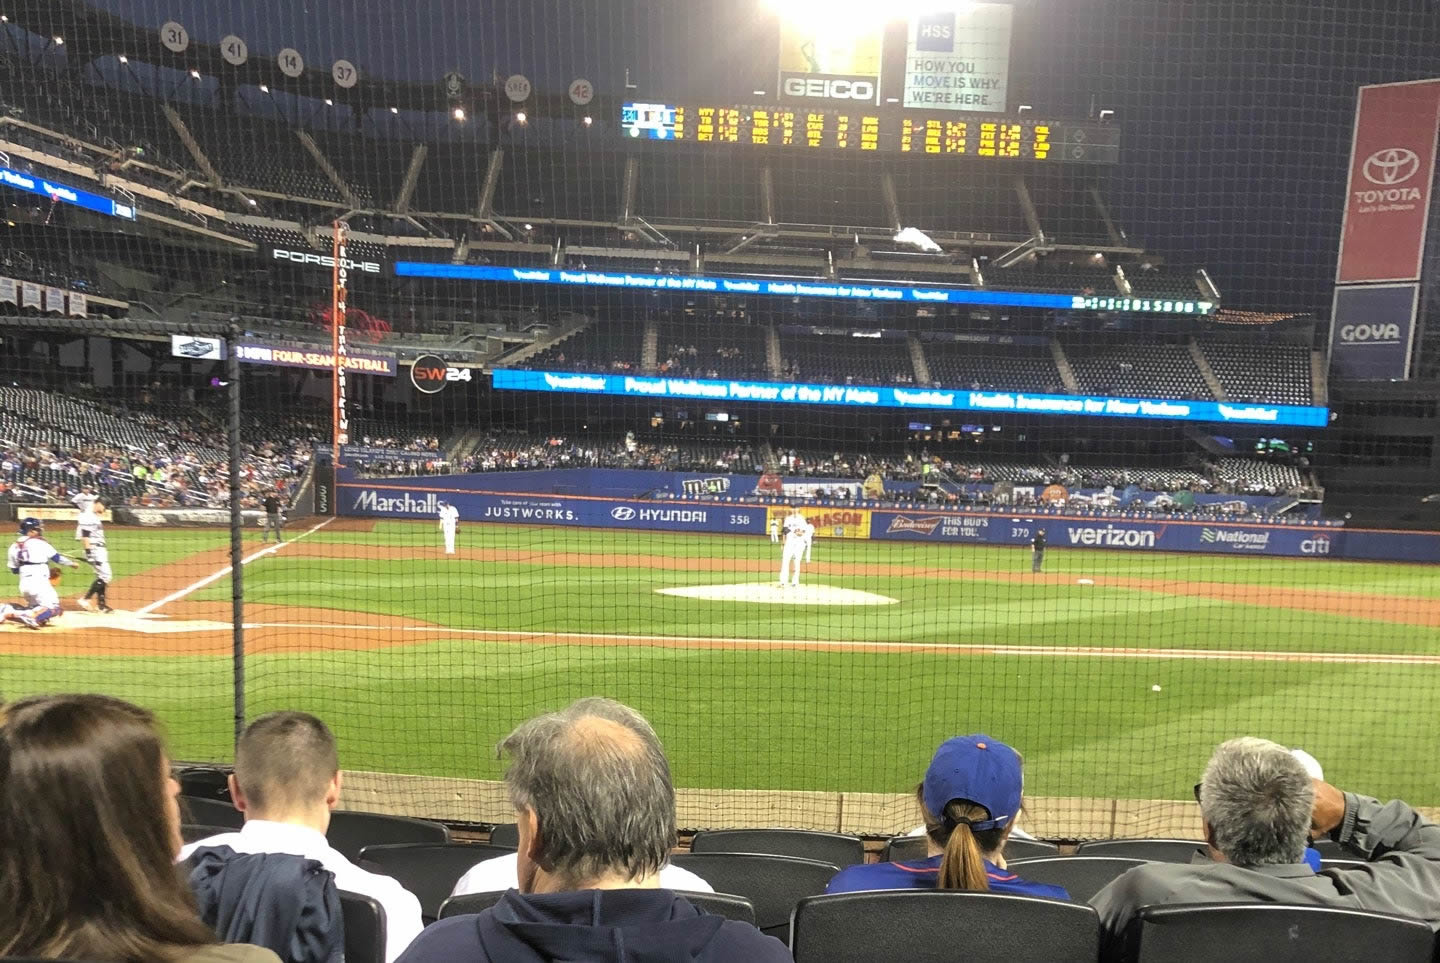 section 11, row 5 seat view  - citi field